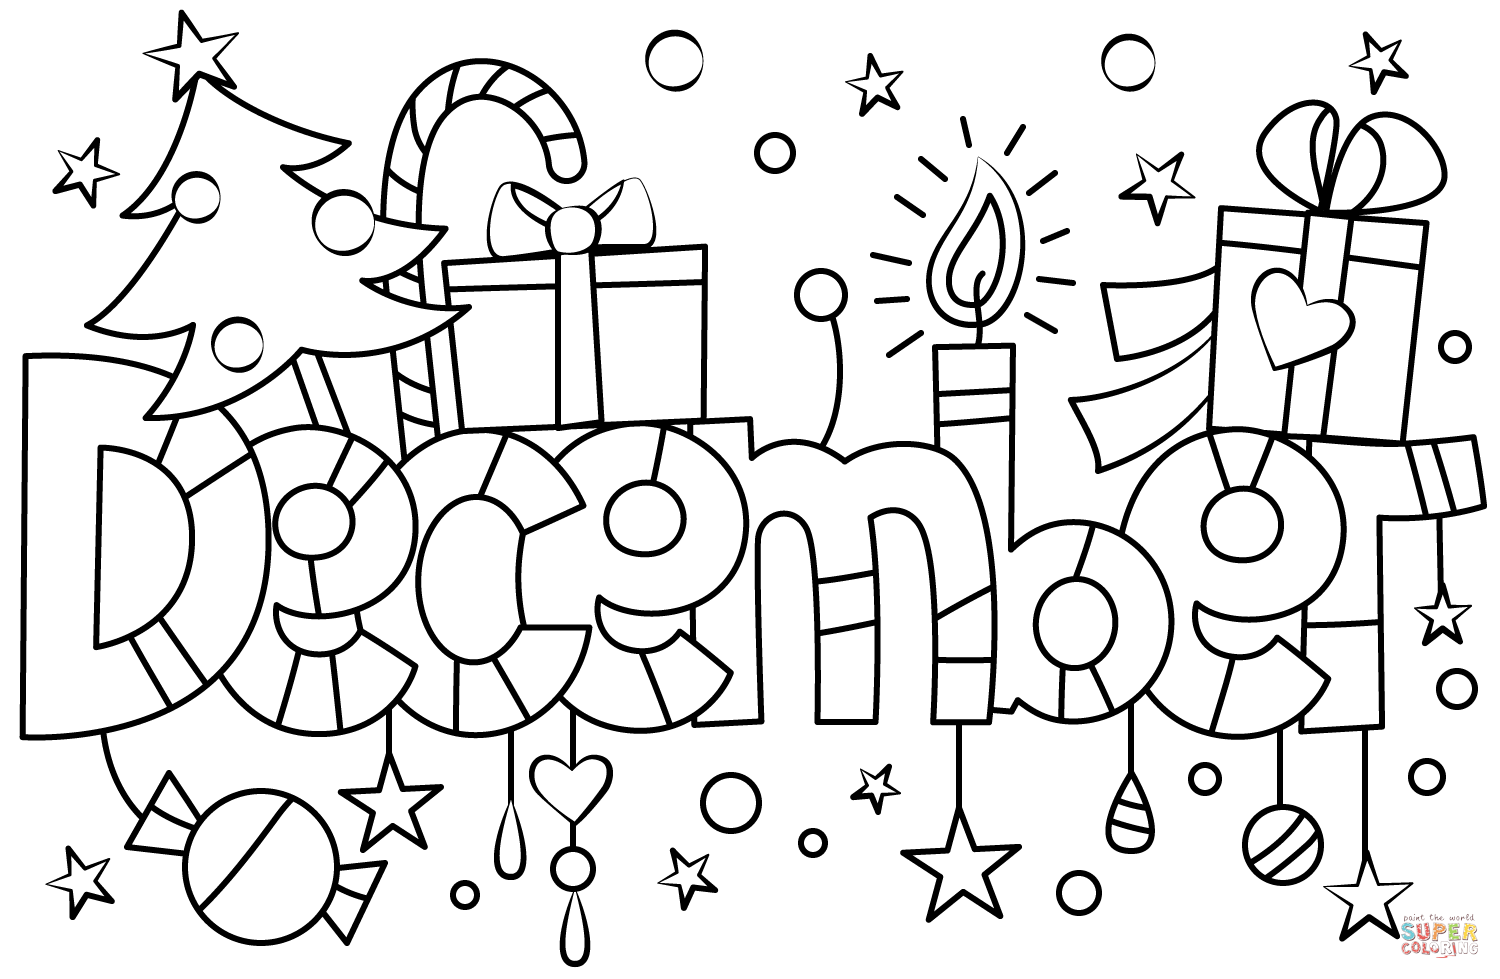 December coloring page free printable coloring pages preschool coloring pages free printable coloring pages christmas coloring pages